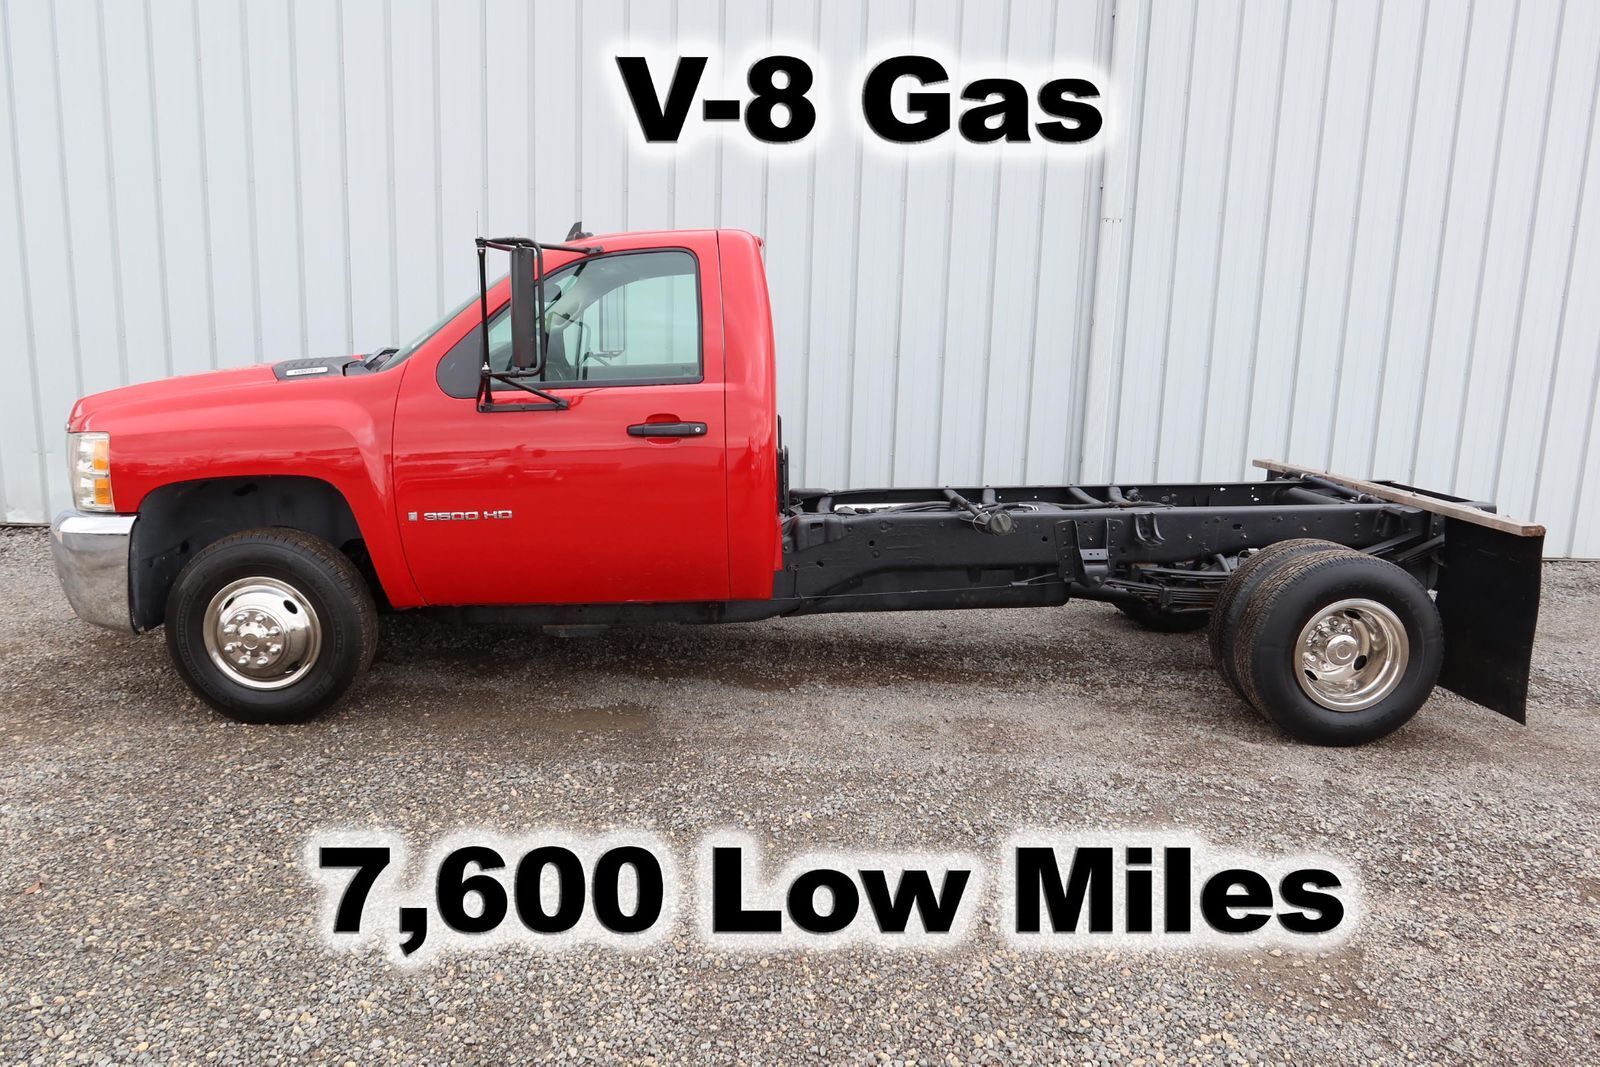 3500 Hd 6.0 Gas Automatic Cab Chassis Haul Deliver Dump Box Truck 7,600 Low Mile